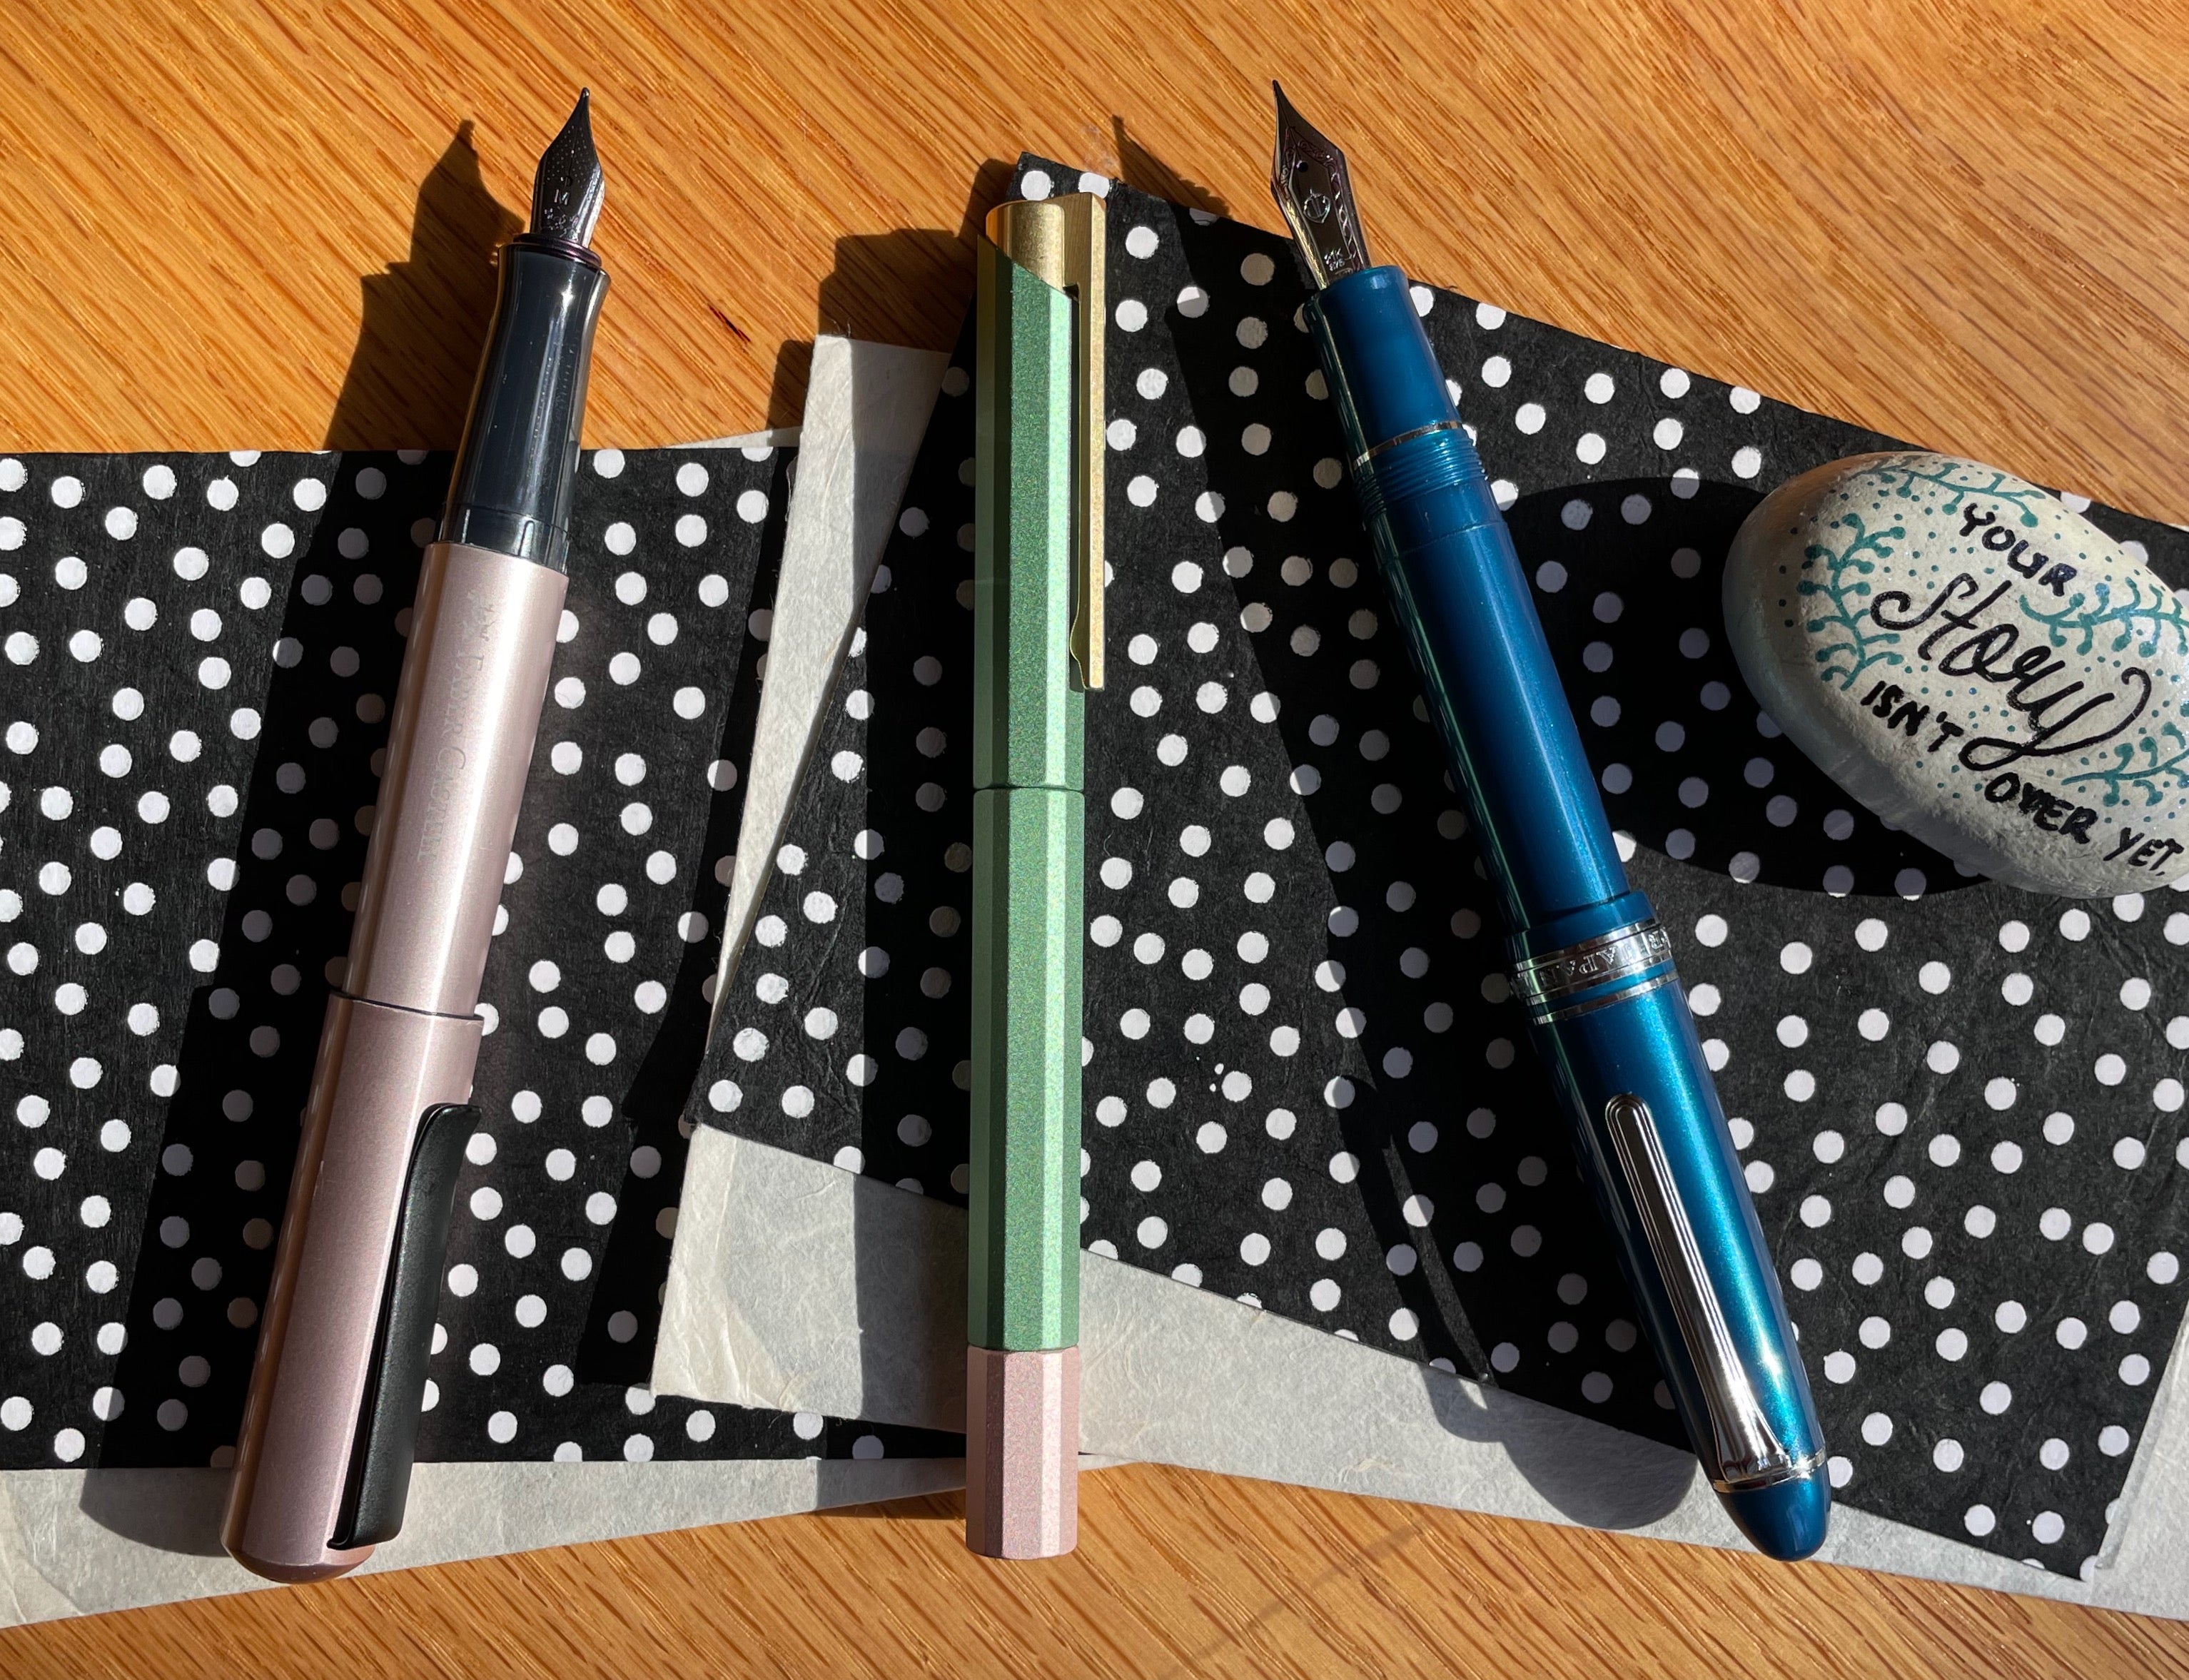 Getting Subjective... Laura's Favorite Pens this Year! (Part One)